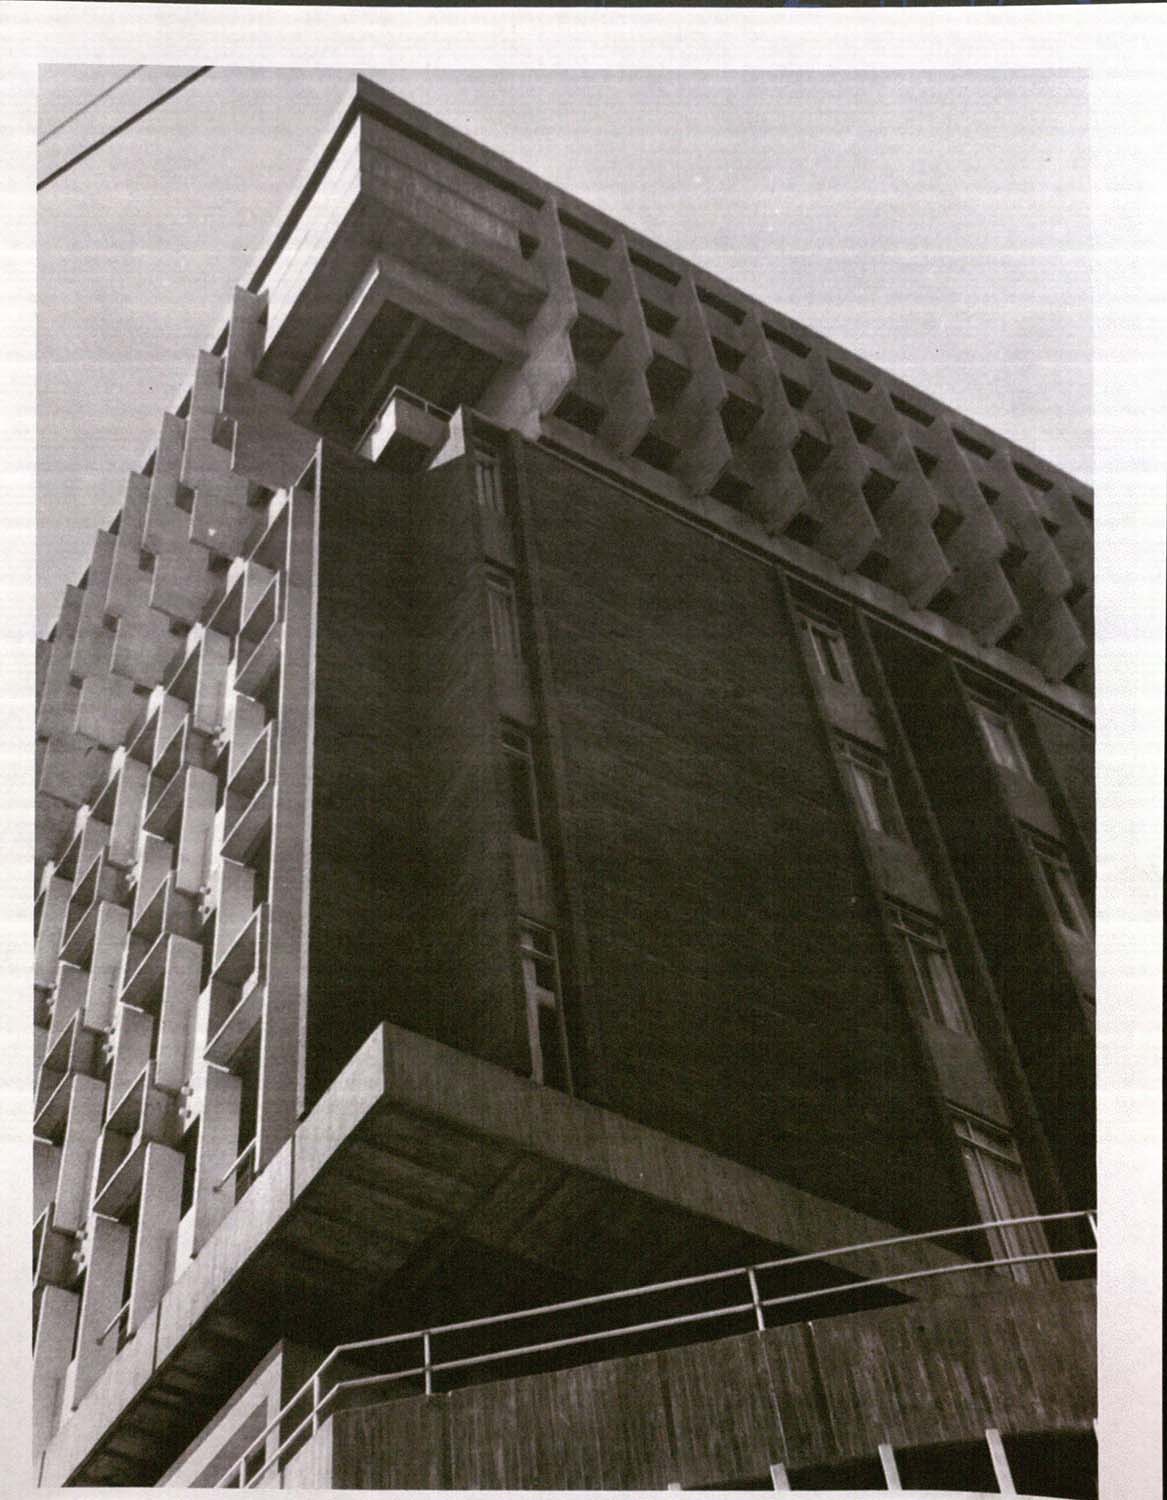 Detail view of the exterior of the 1965 Iraqi Reinsurance Building highlighting the hierarchical design of the upper floors.